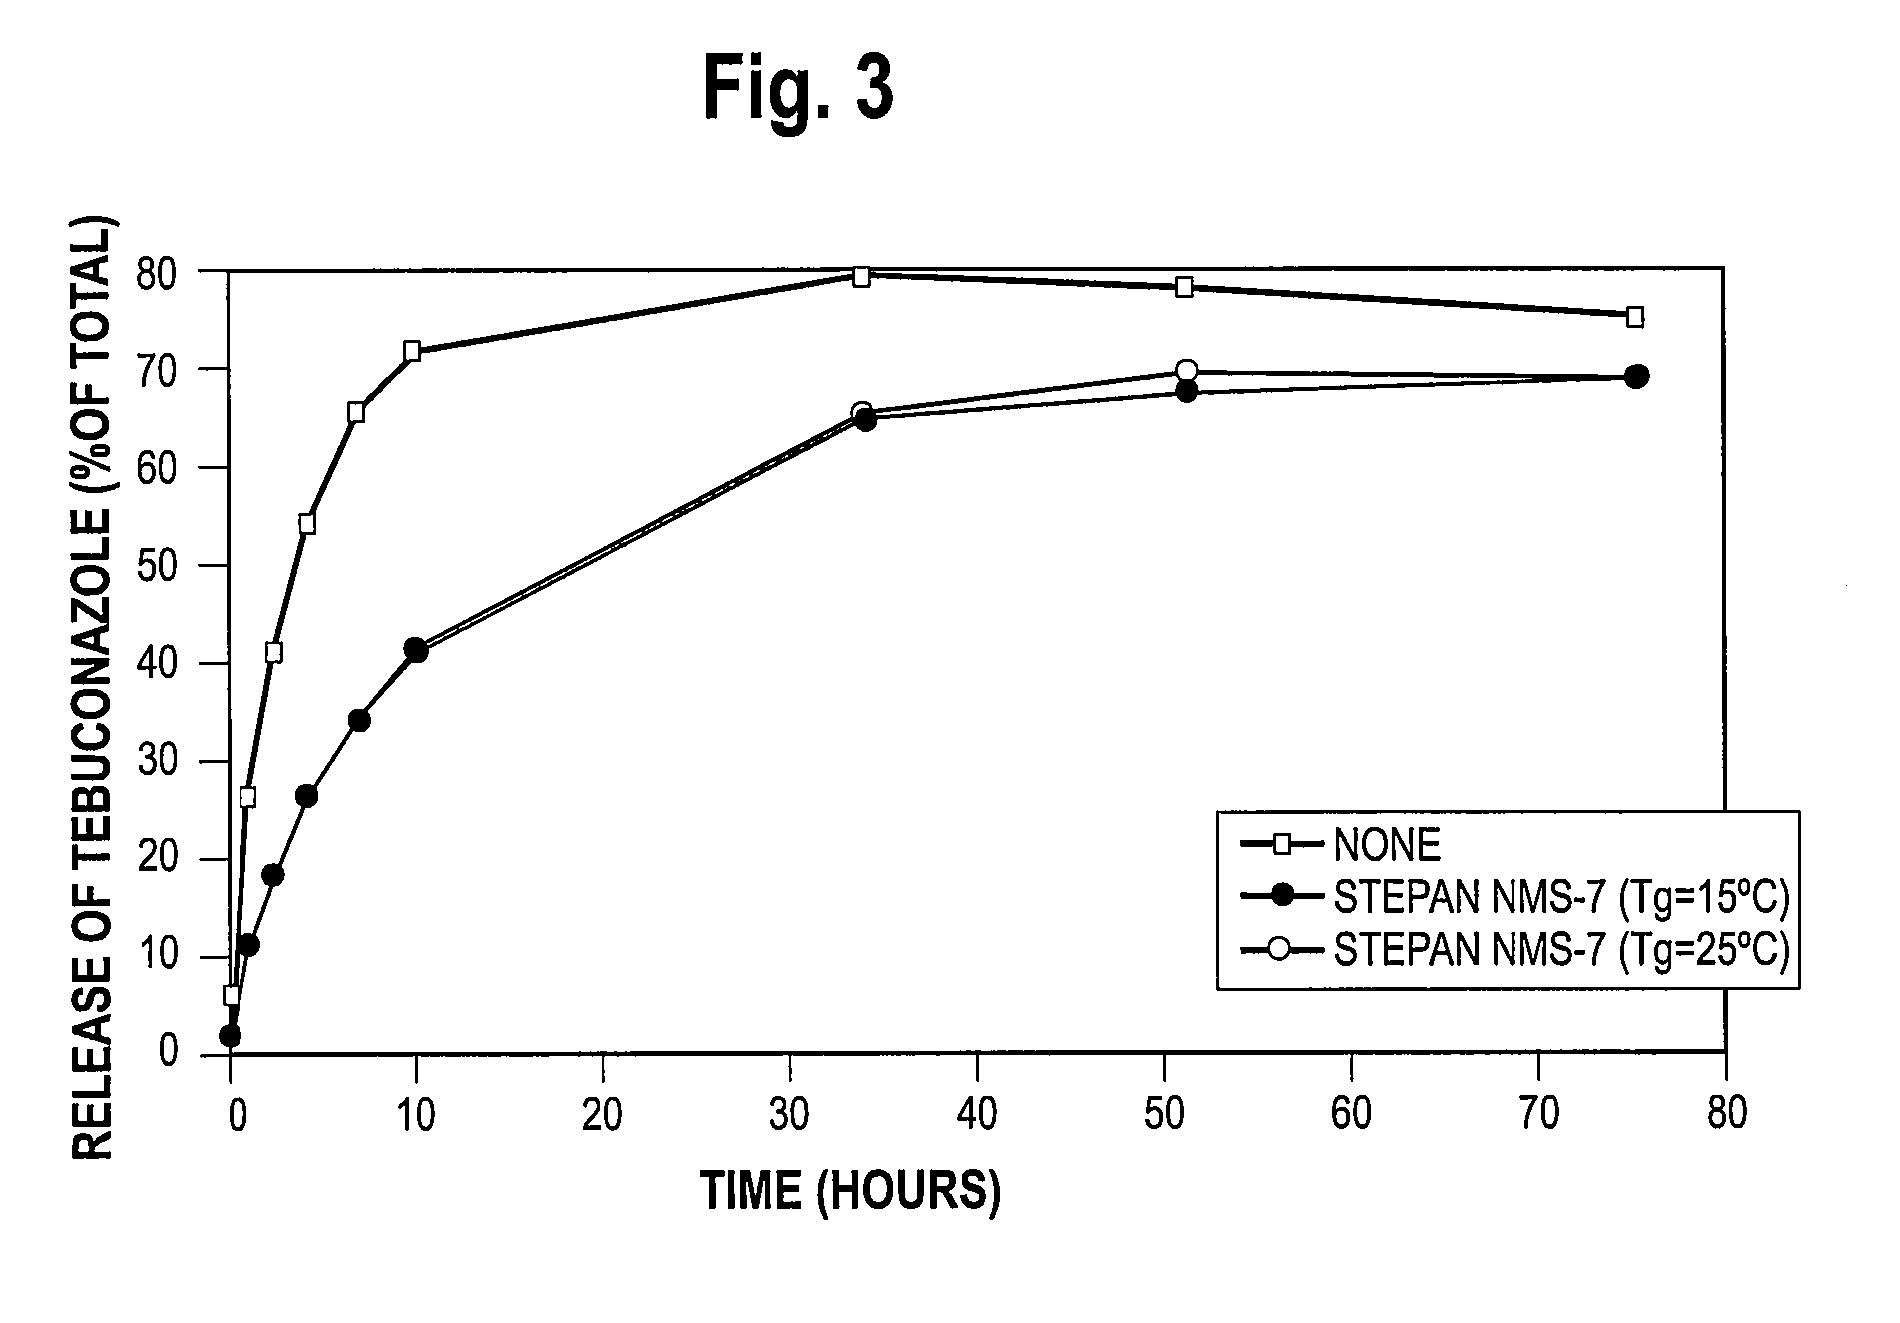 Method of controlling the release of agricultural active ingredients from treated plant seeds